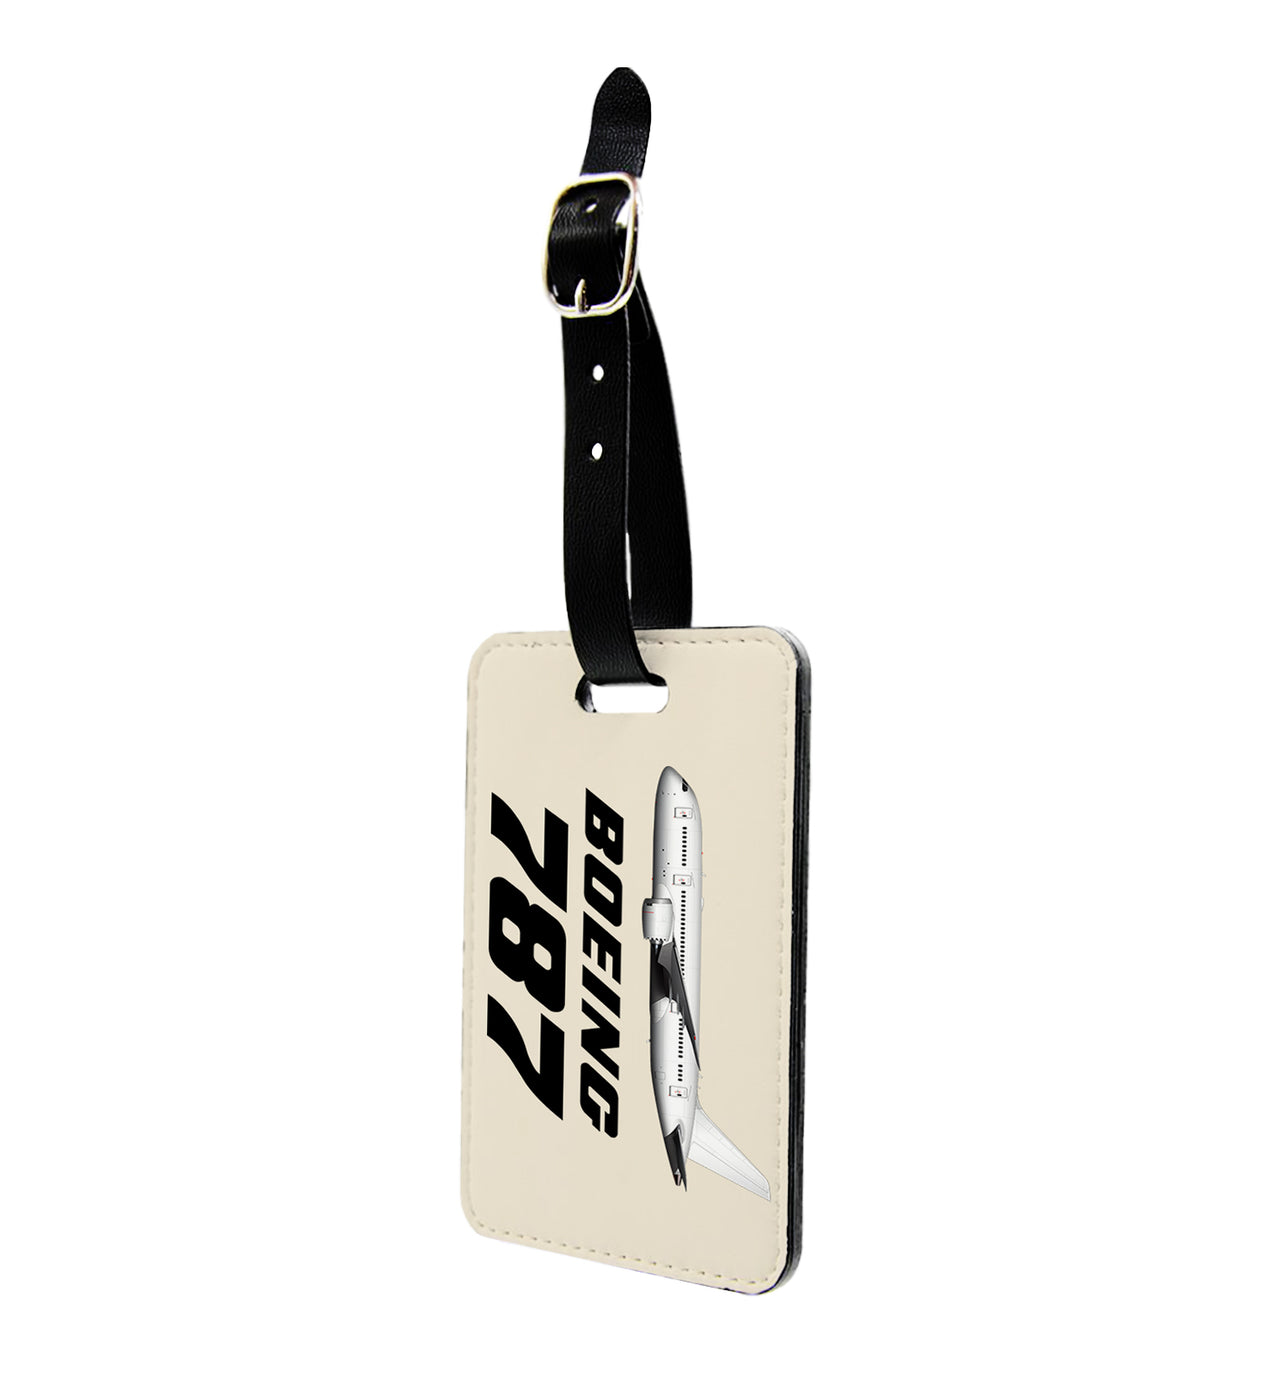 The Boeing 787 Designed Luggage Tag